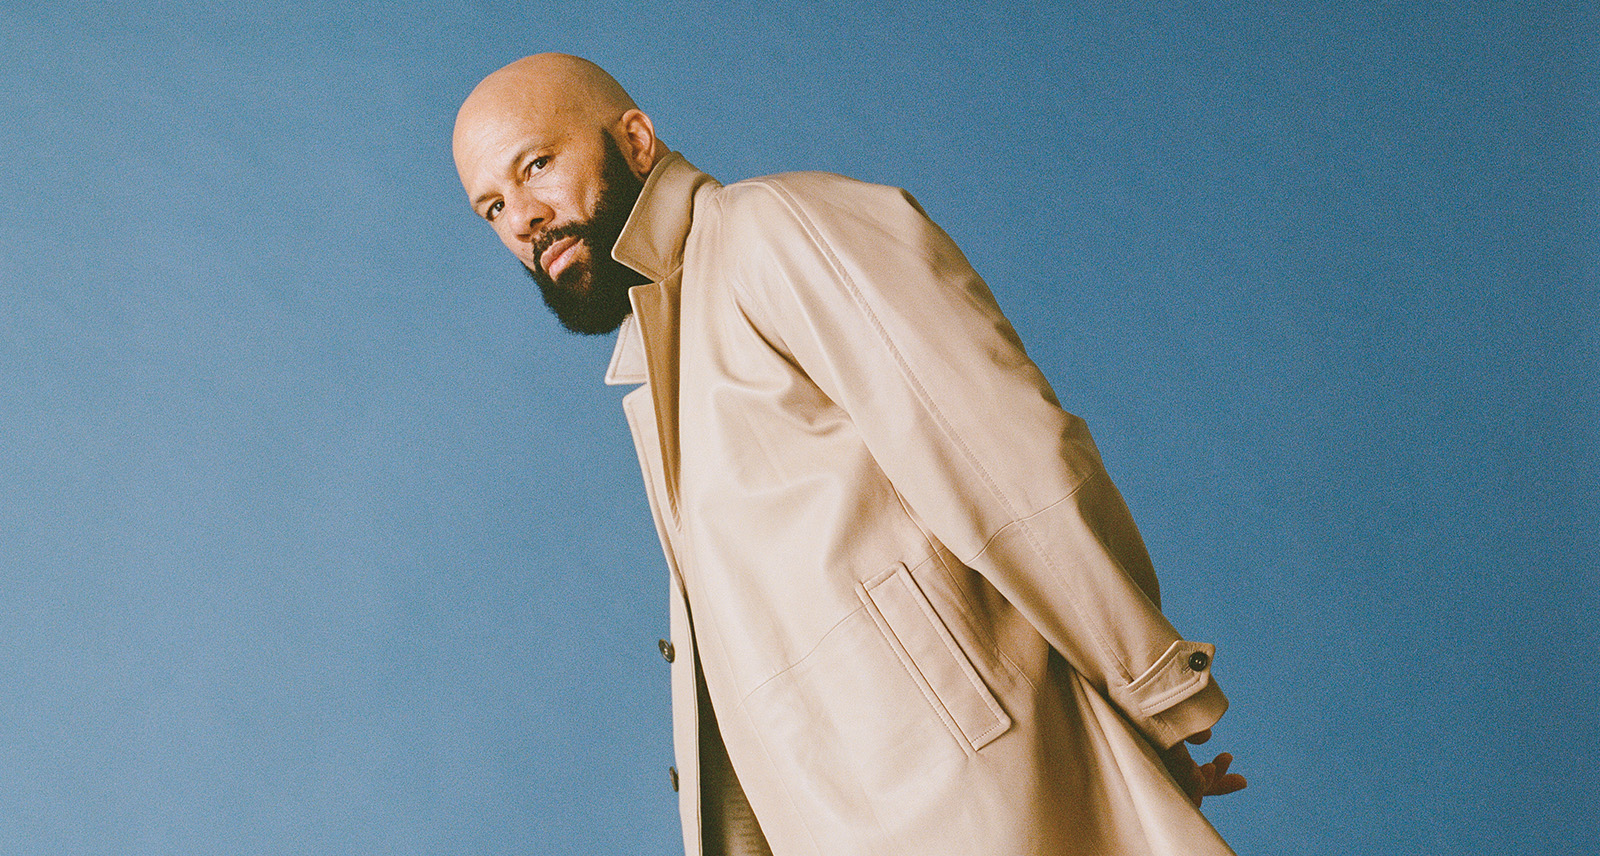 Common leans in front of blue background.